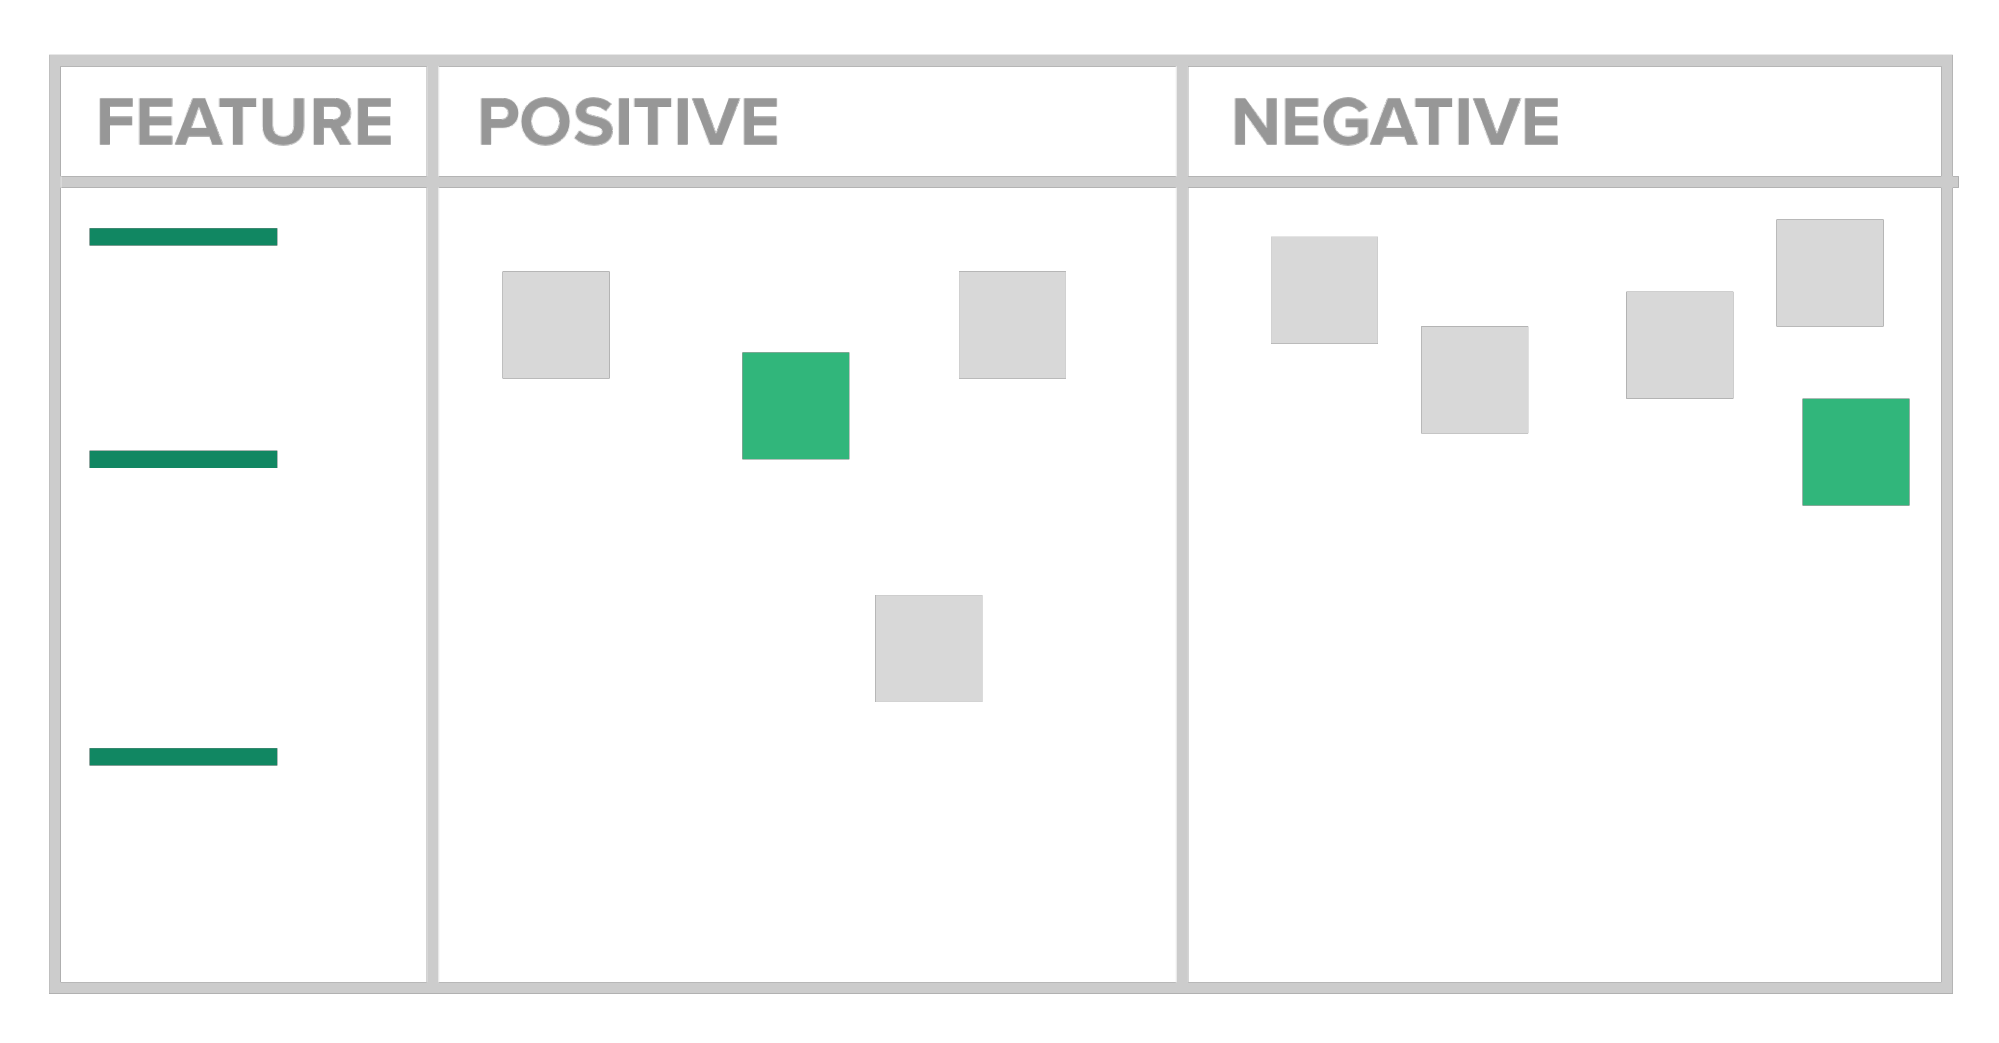 A graphic showing note taking areas for positive and negative feedback to a feature